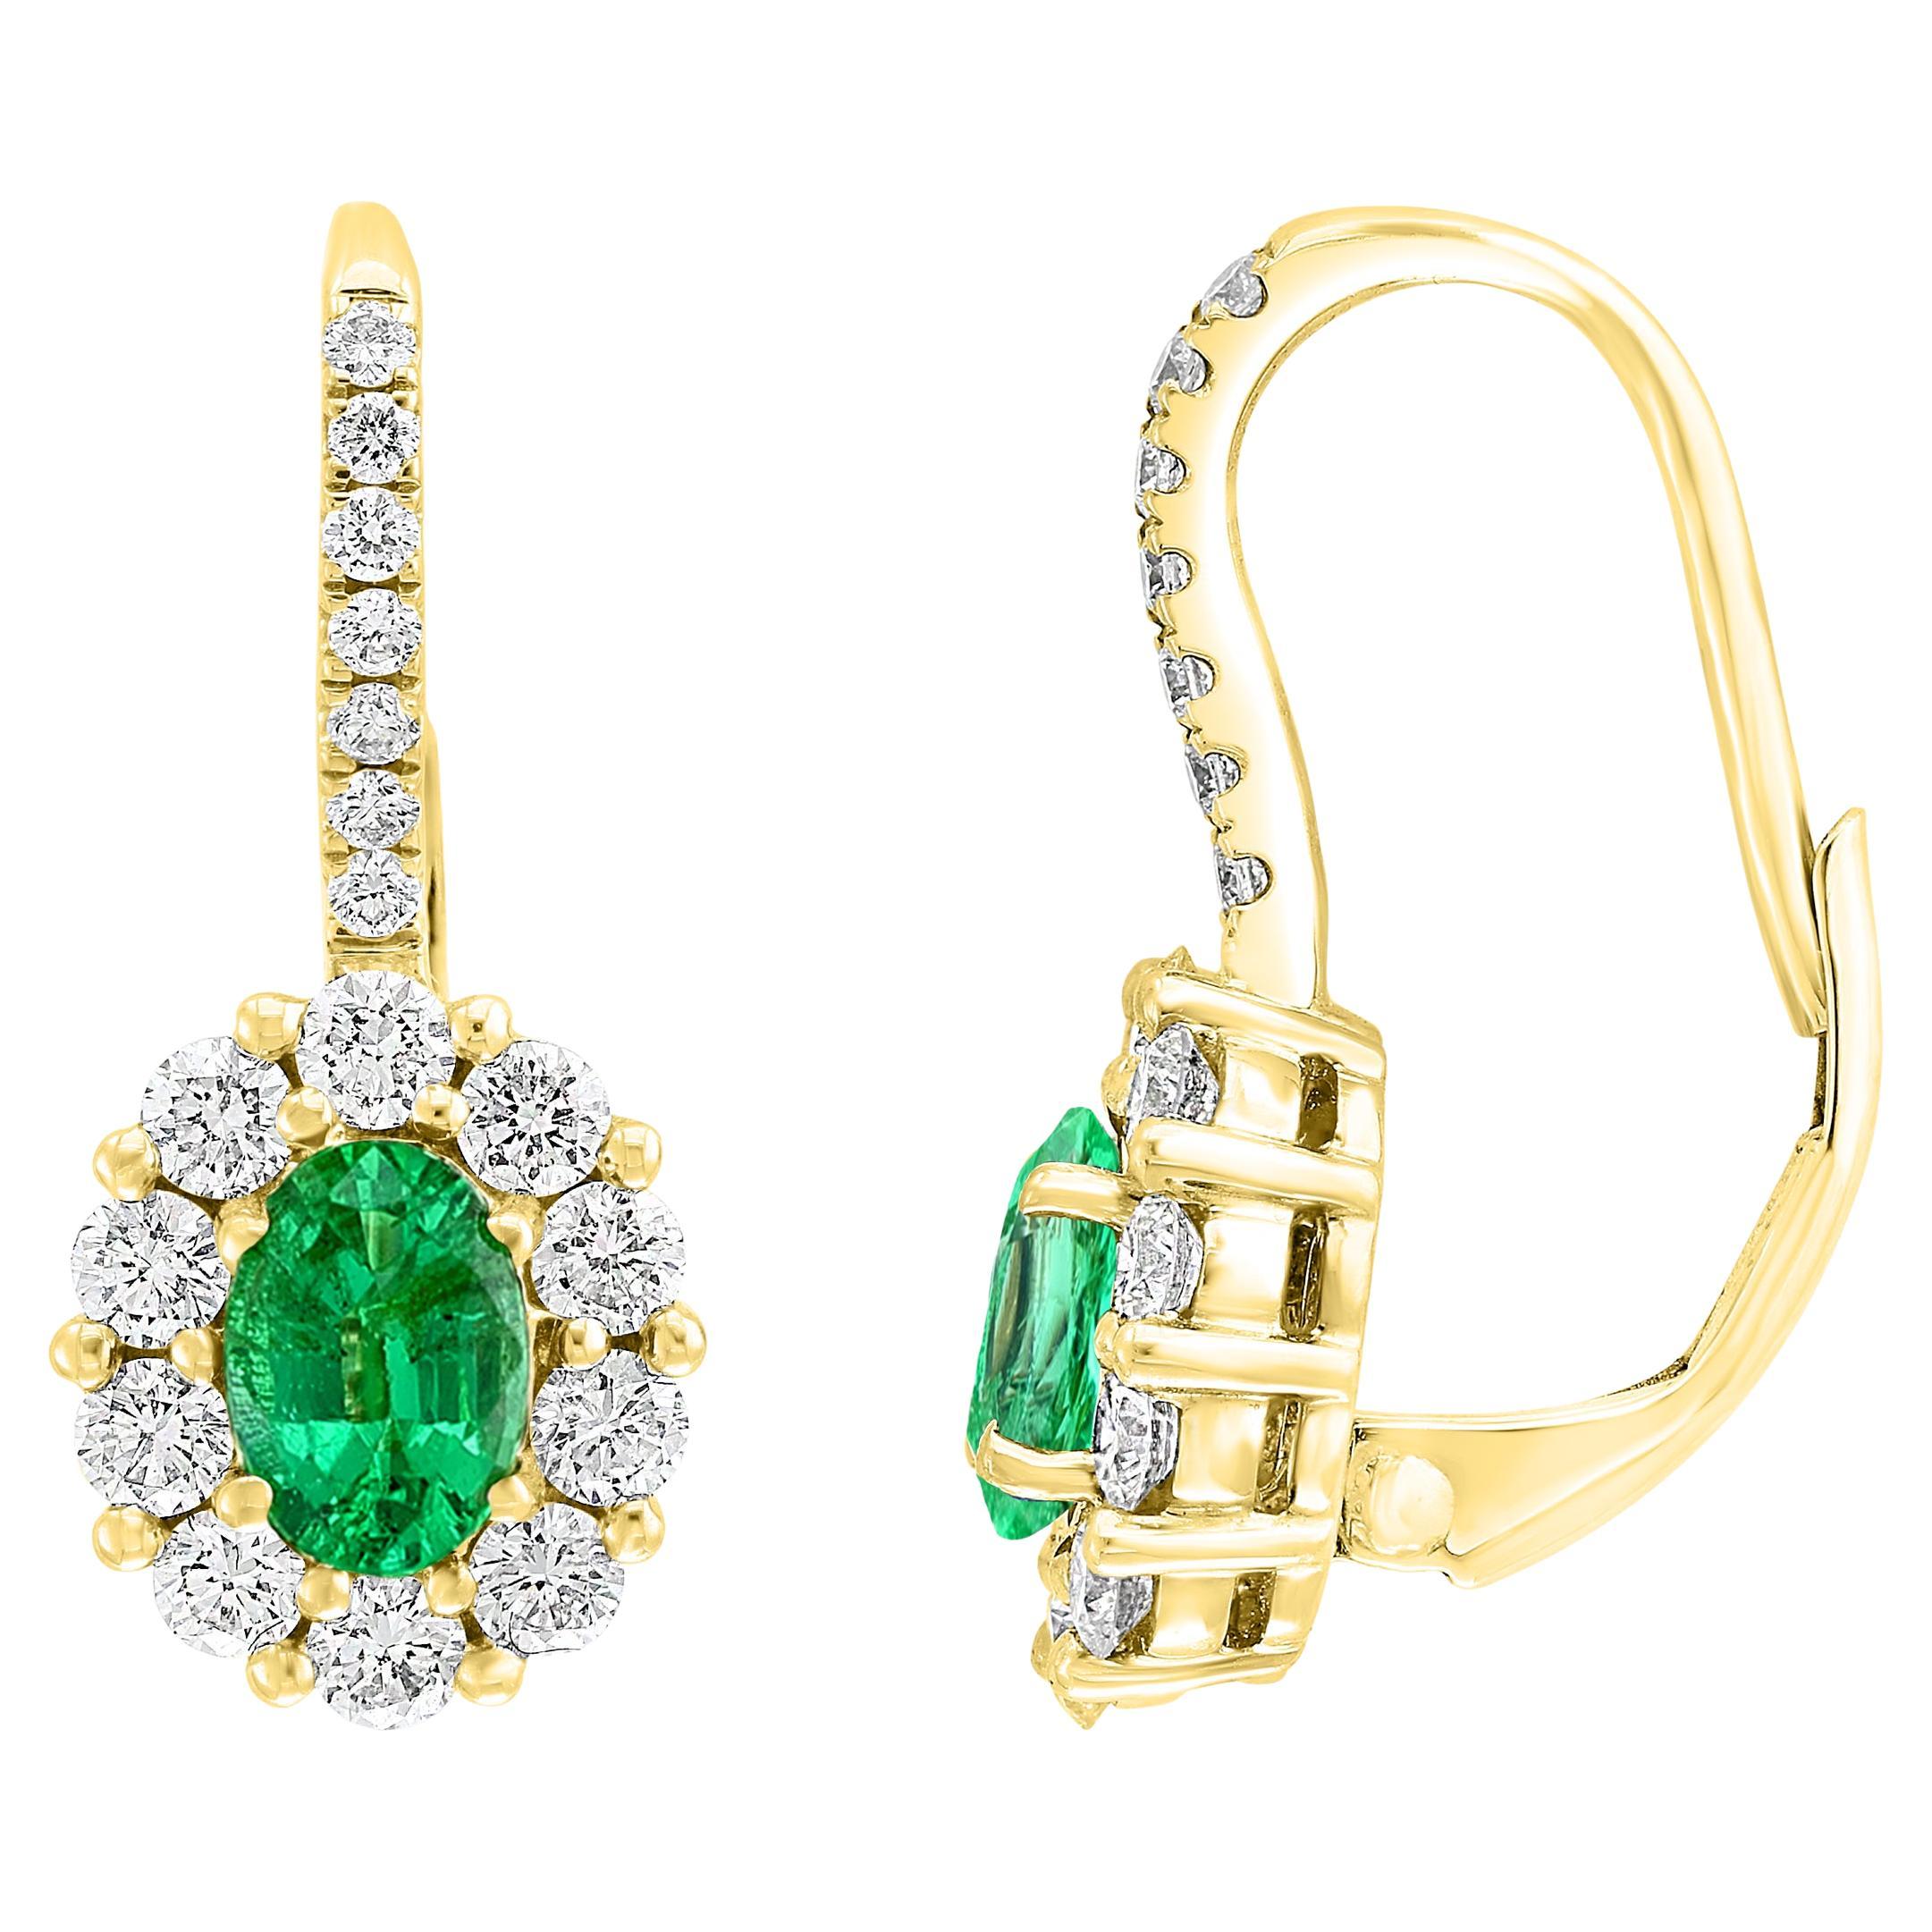 0.80 Carat Oval Cut Emerald and Diamond Earrings in 18K Yellow Gold For Sale